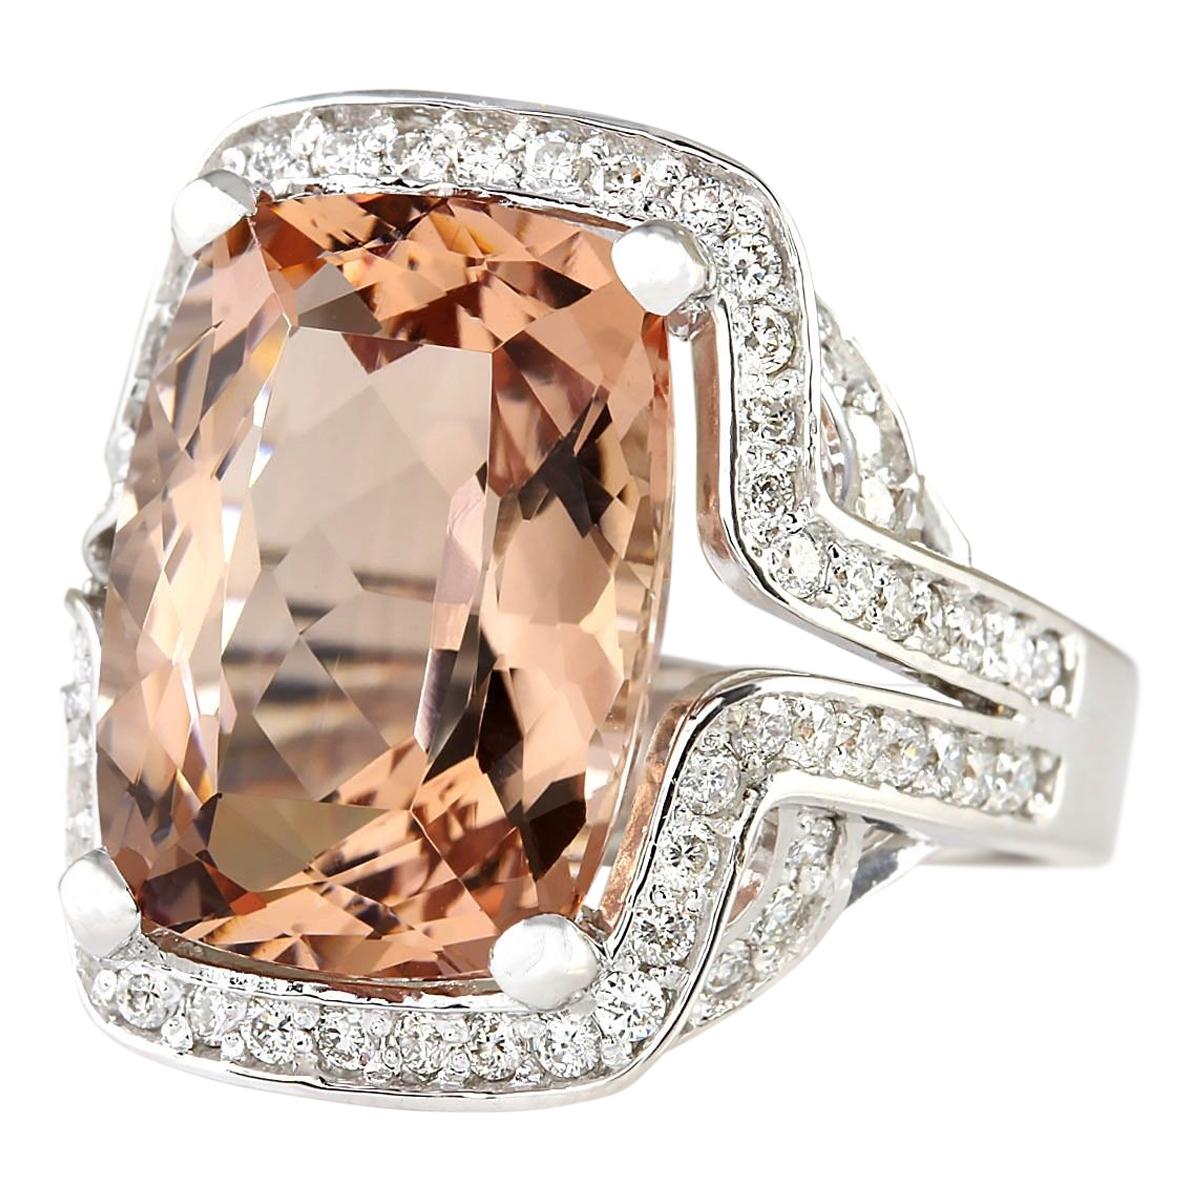 Introducing our remarkable 11.98 Carat Natural Morganite Ring, a true epitome of elegance and grace. This exquisite piece, weighing a substantial 10.0 grams, is a testament to refined luxury. The centerpiece of this ring is a breathtaking 10.78